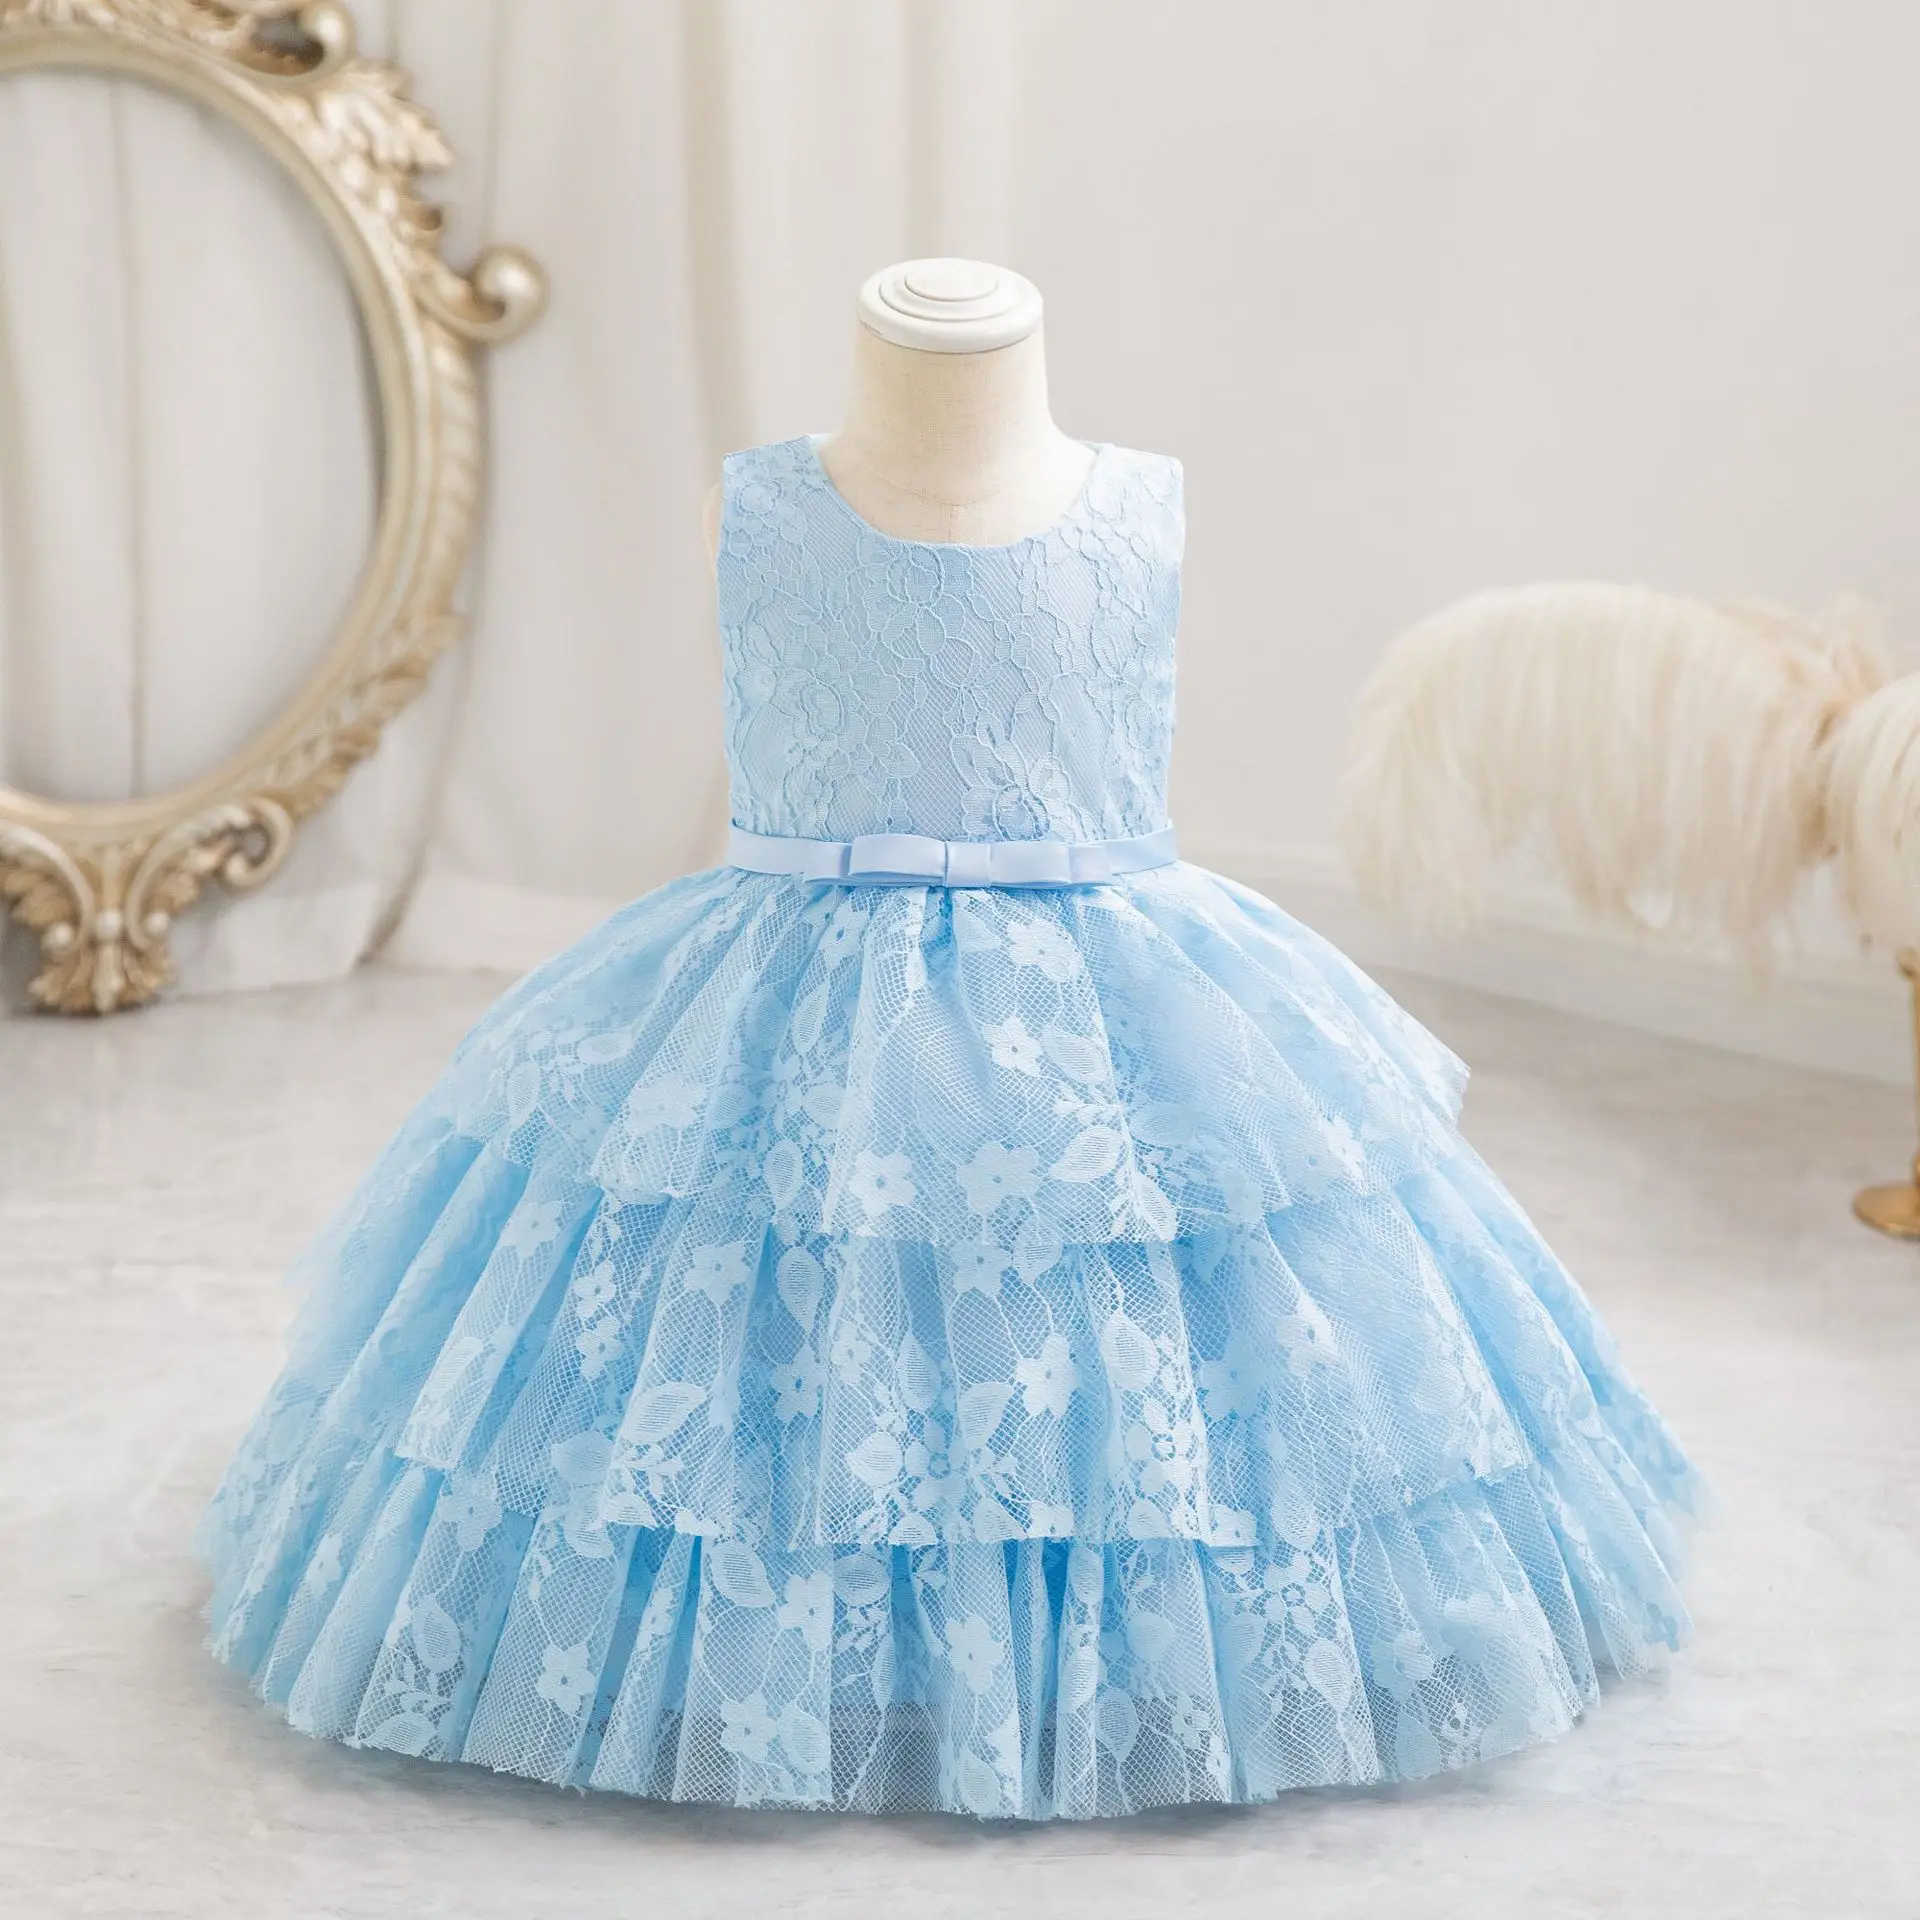 2023 New Baby Girl Children's Dress Dress One Year Old Birthday Dress Lace  Cute Princess Christmas Gift Toddler Newborn Clothing - AliExpress